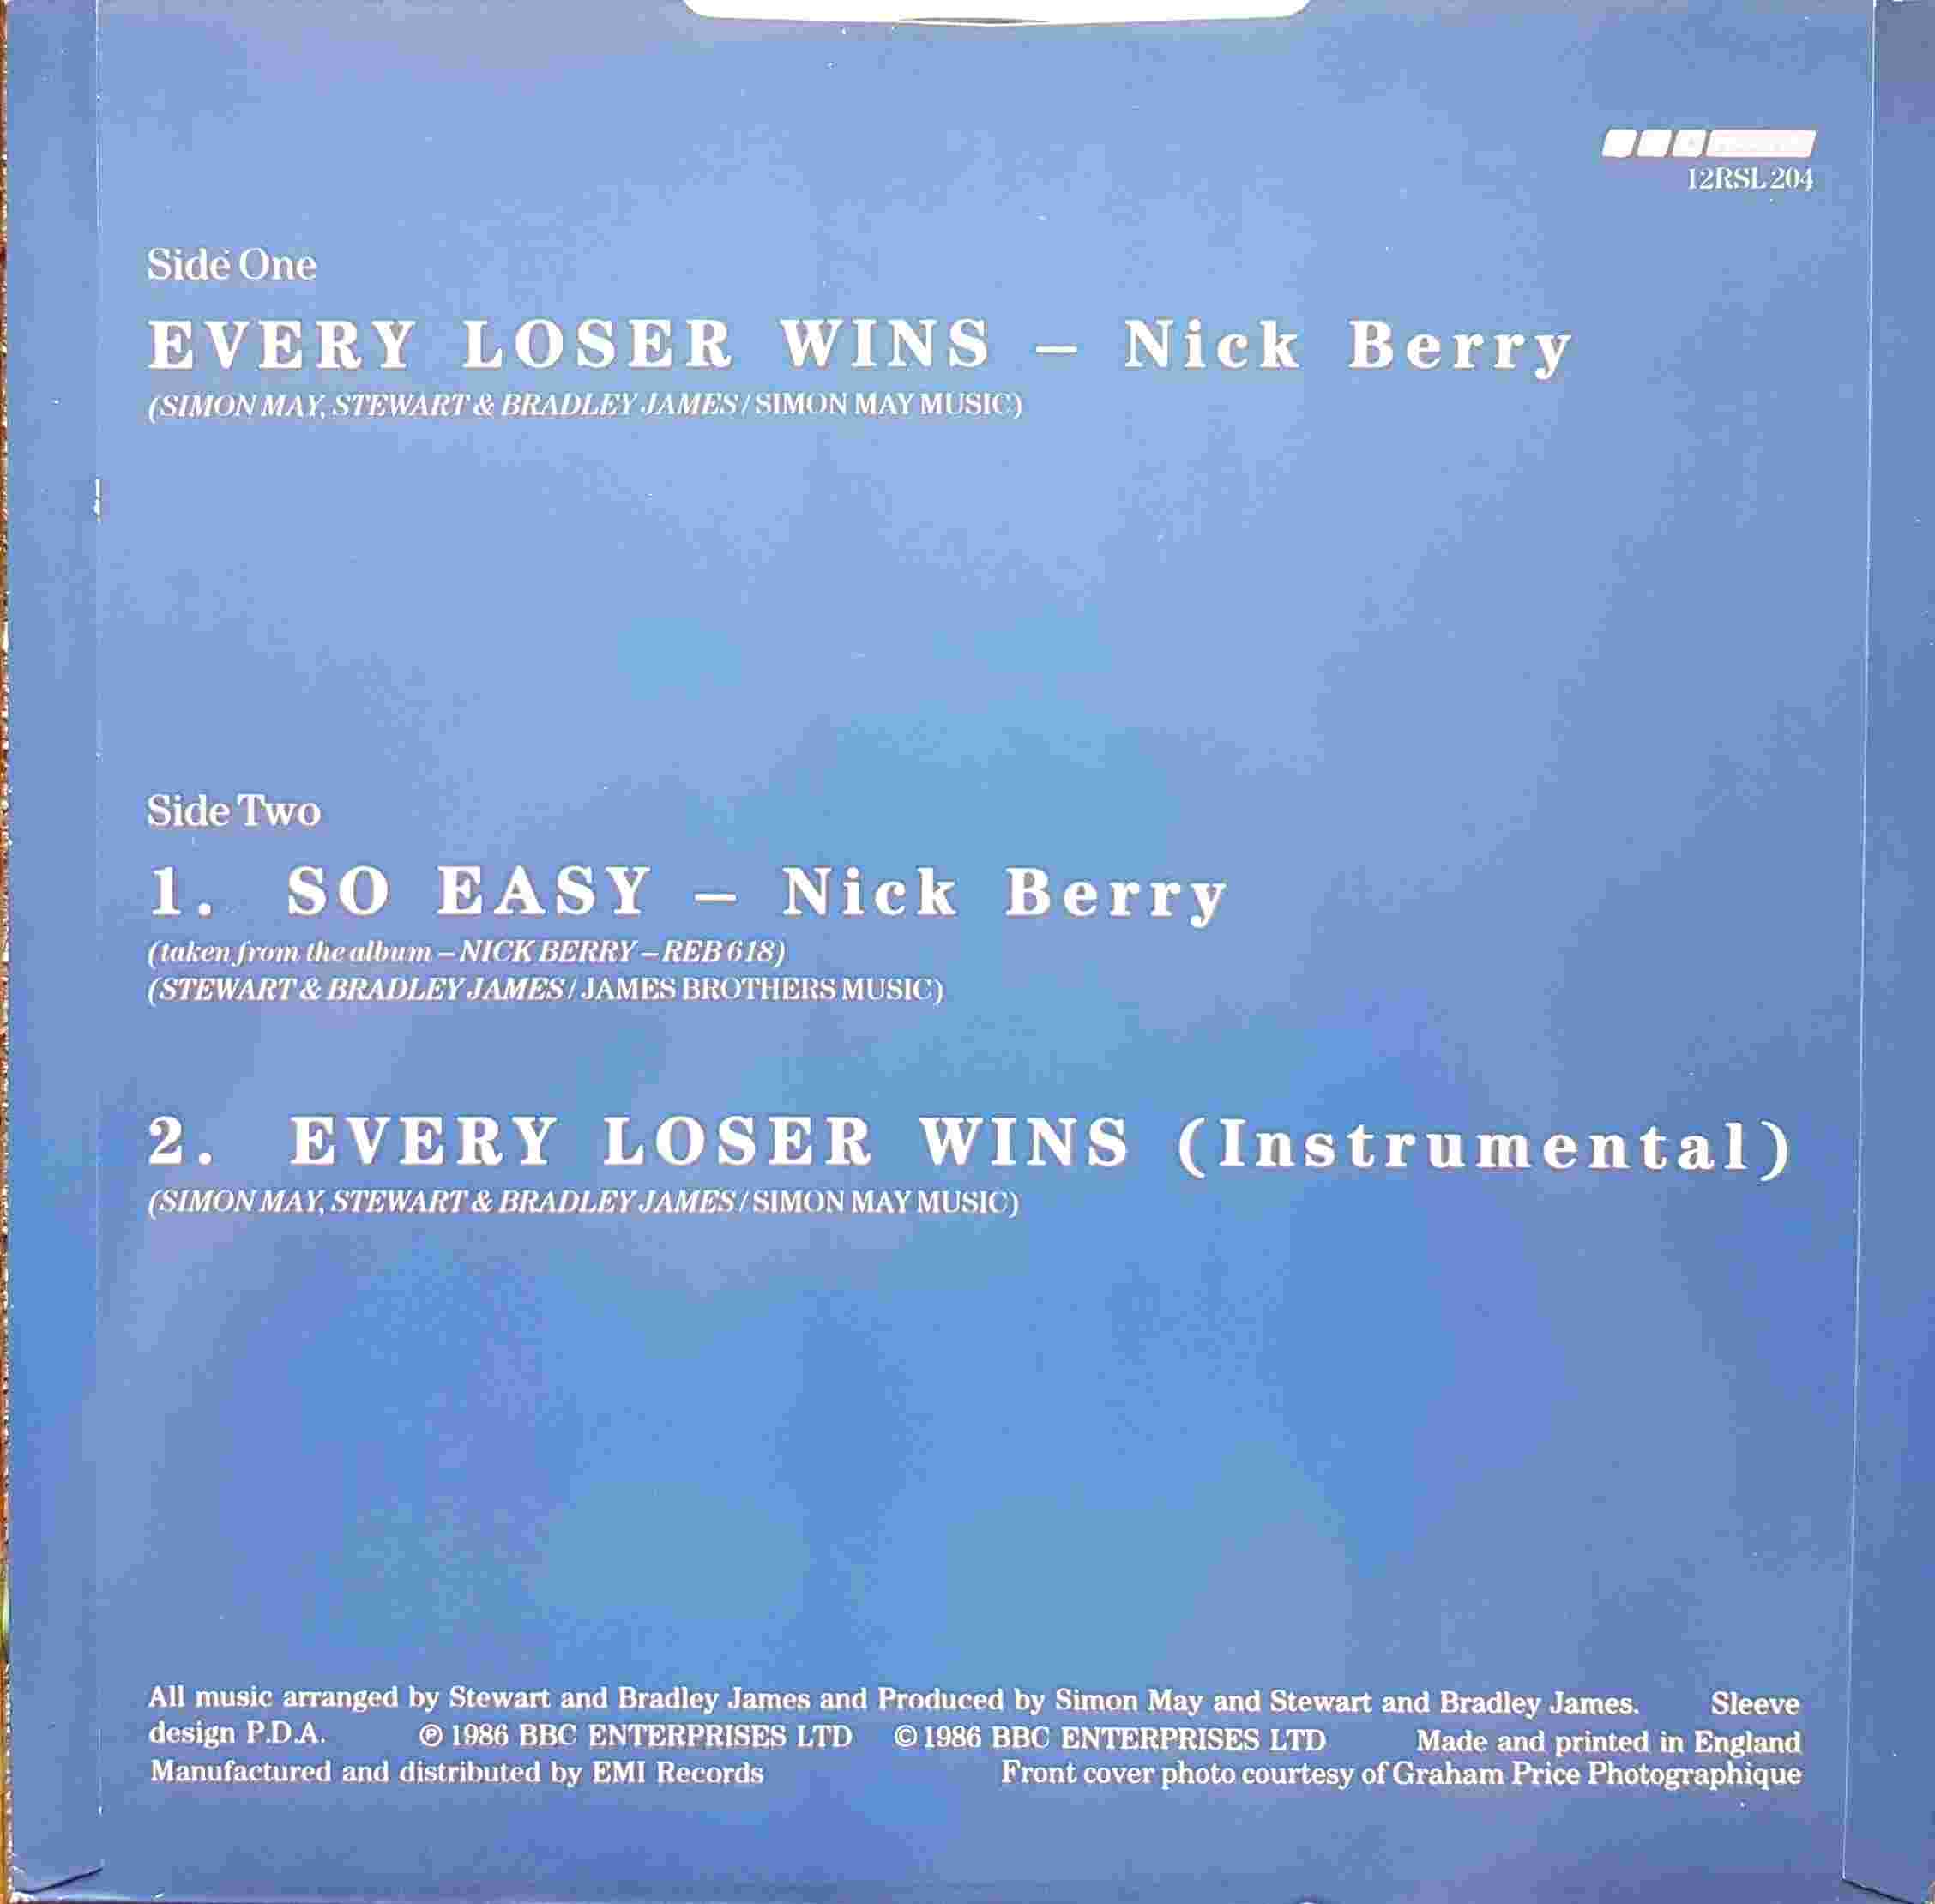 Picture of 12 RSL 204 Every loser wins (EastEnders) by artist Simon May / Stewart James / Bradley James from the BBC records and Tapes library